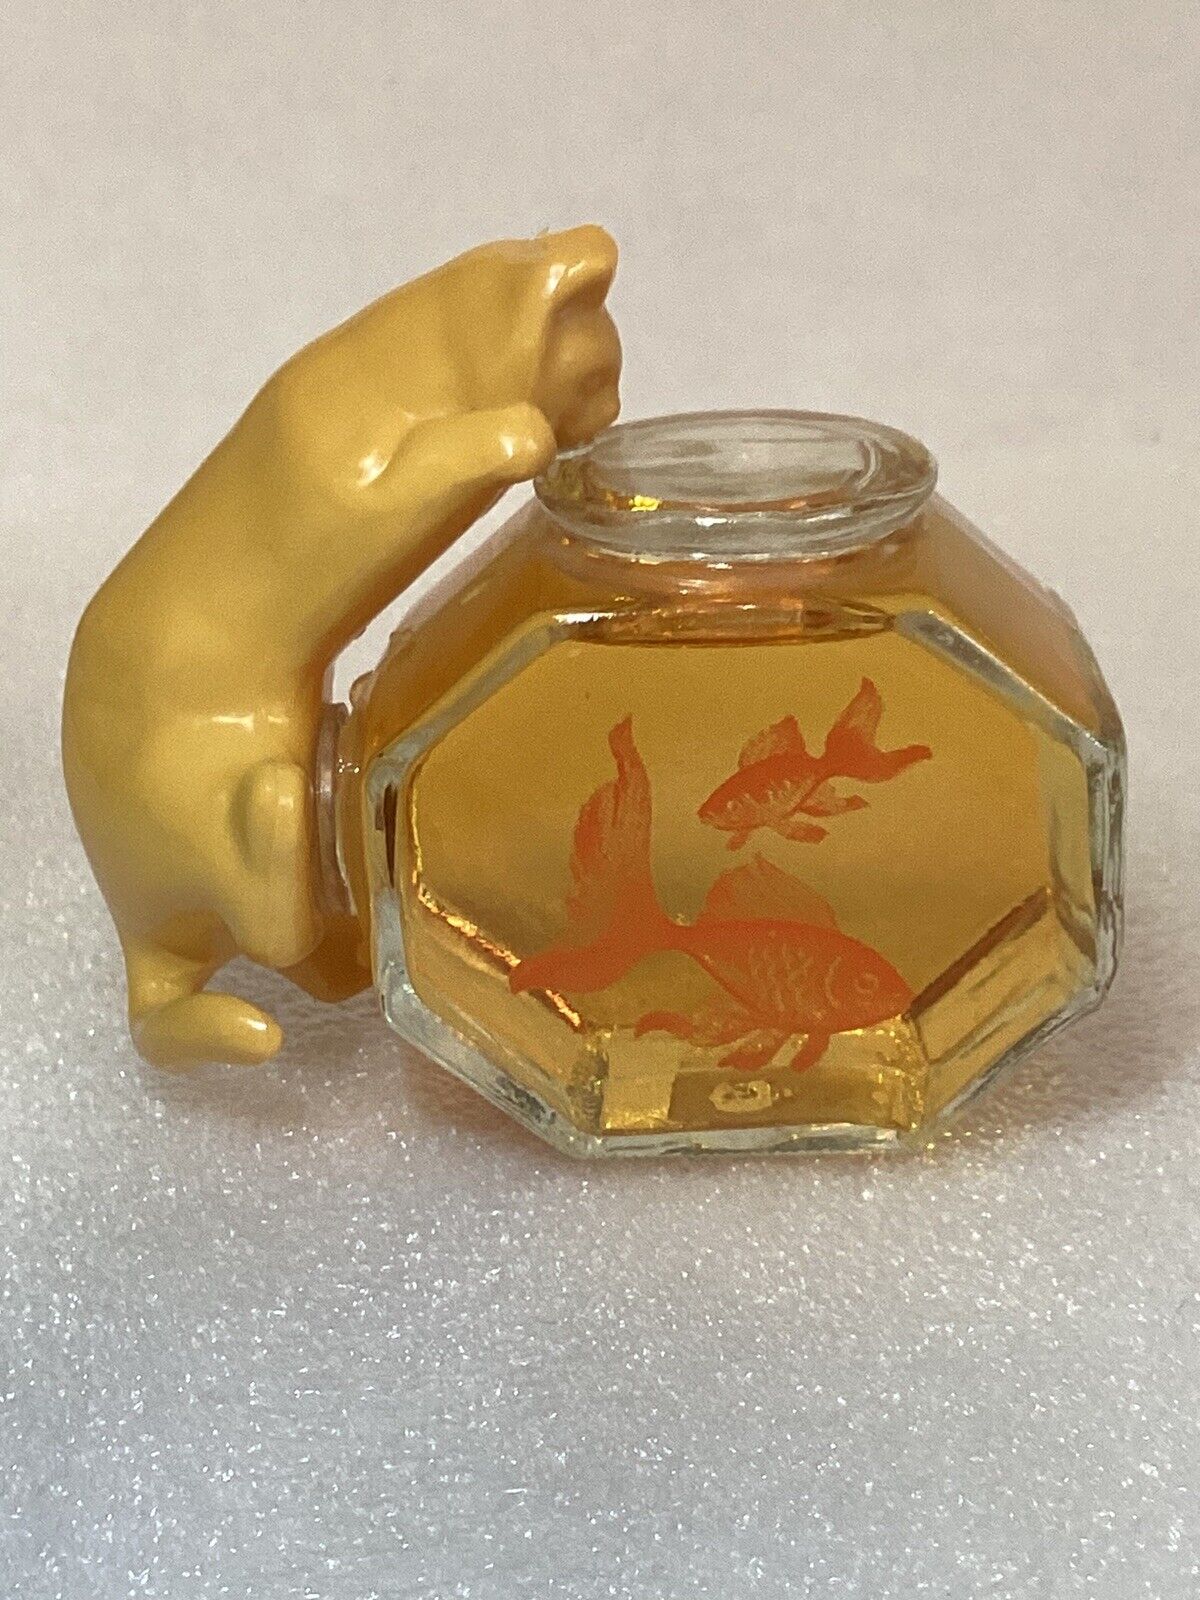 Adorable 1979 “ Curious Kitty” Sweet Honesty Perfume Bottle By Avon Full